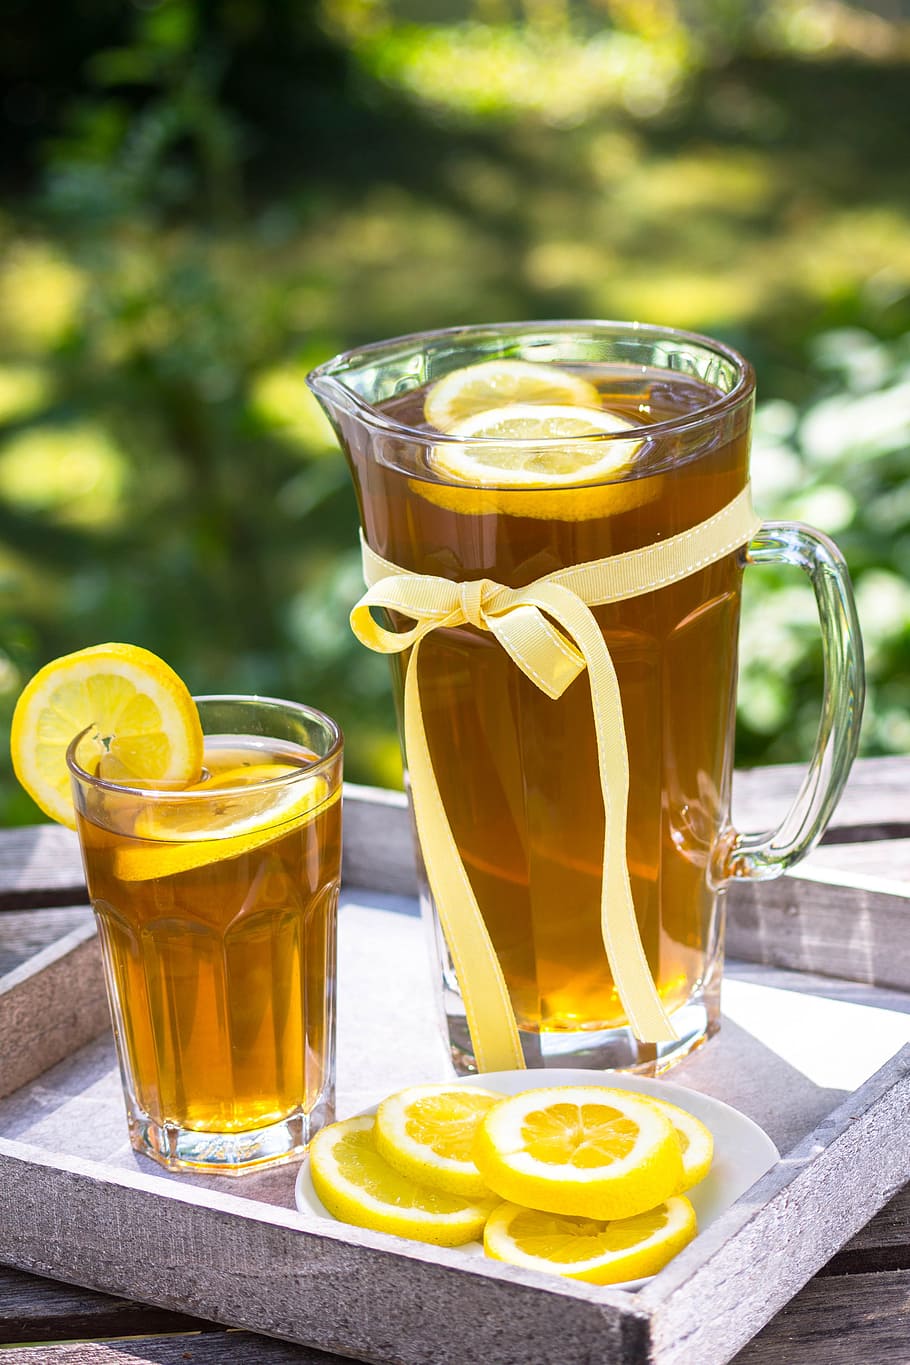 clear, glass pitcher, tea, inside, daytime, ice tea, summer, lemon, food and drink, refreshment